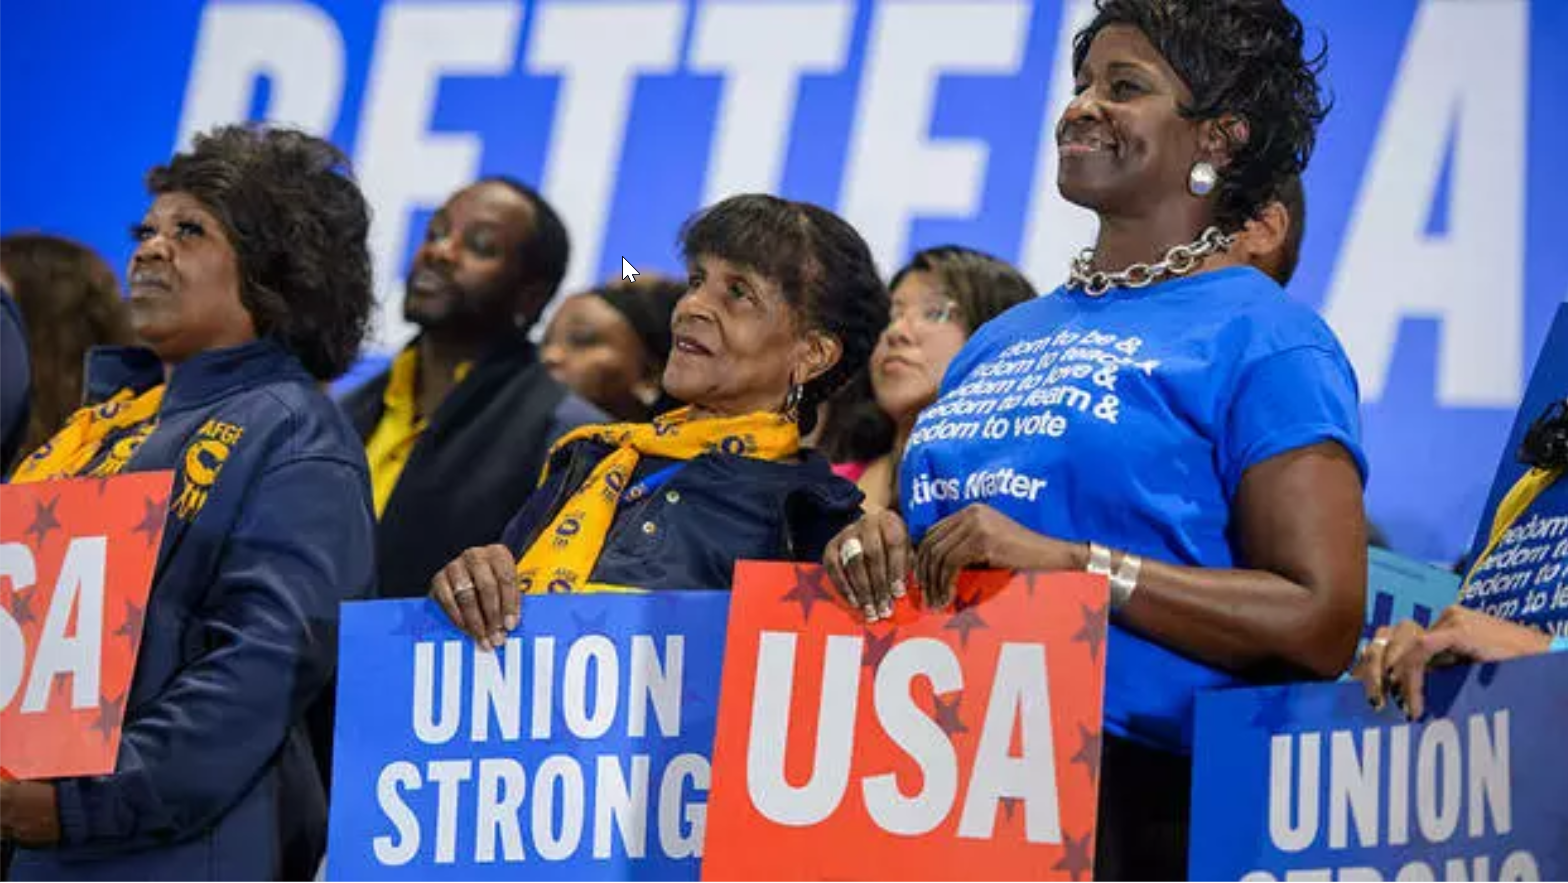 Union members look on during a rally for the midterm elections. They are holding signs that say "USA" and "Union strong."